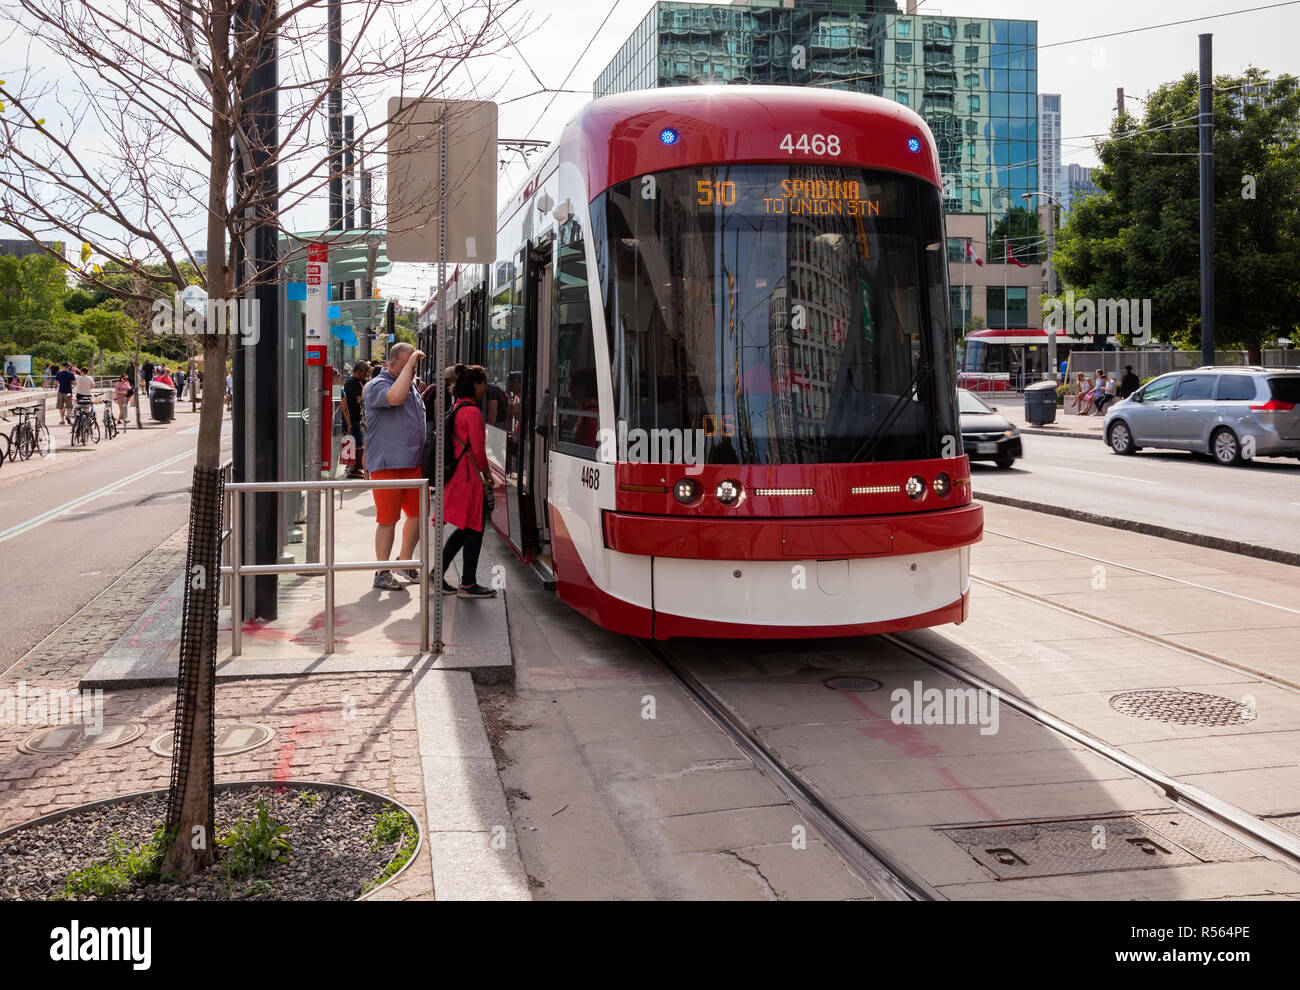 A Flexity Outlook streetcar (number 4468) part of the Spadina line of the TTC (Toronto Transit Commission) running along Queens Quay W. City of Toront Stock Photo